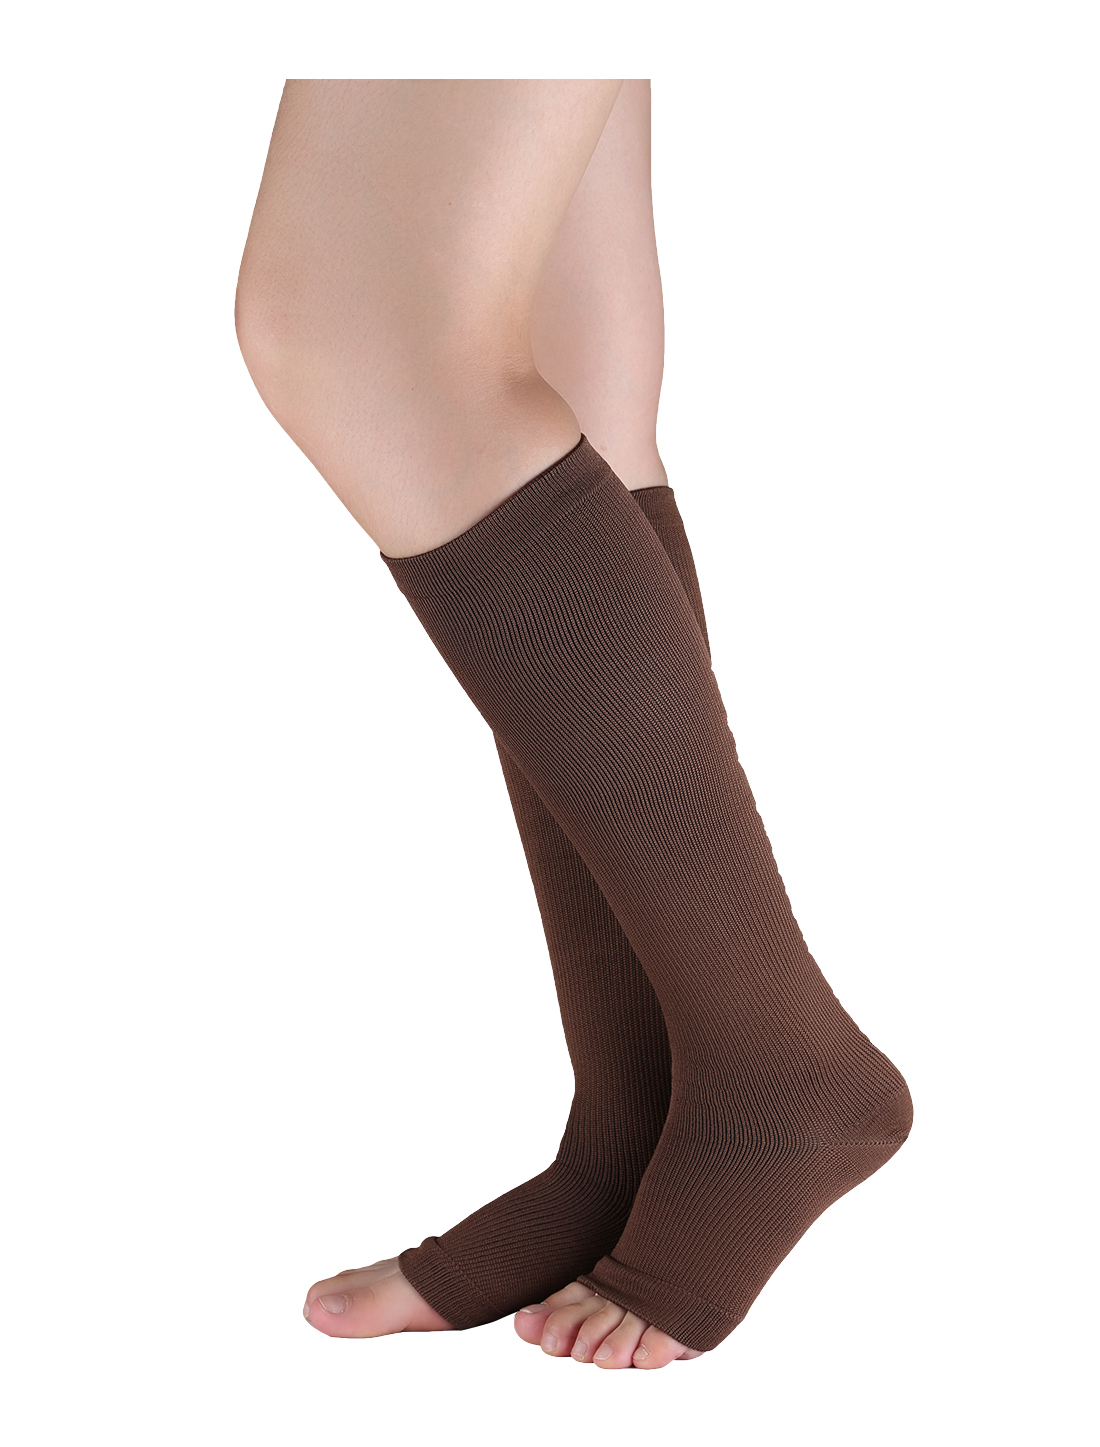 Unique Bargains Unisex Breathable One Size Toeless Compression Knee High Socks